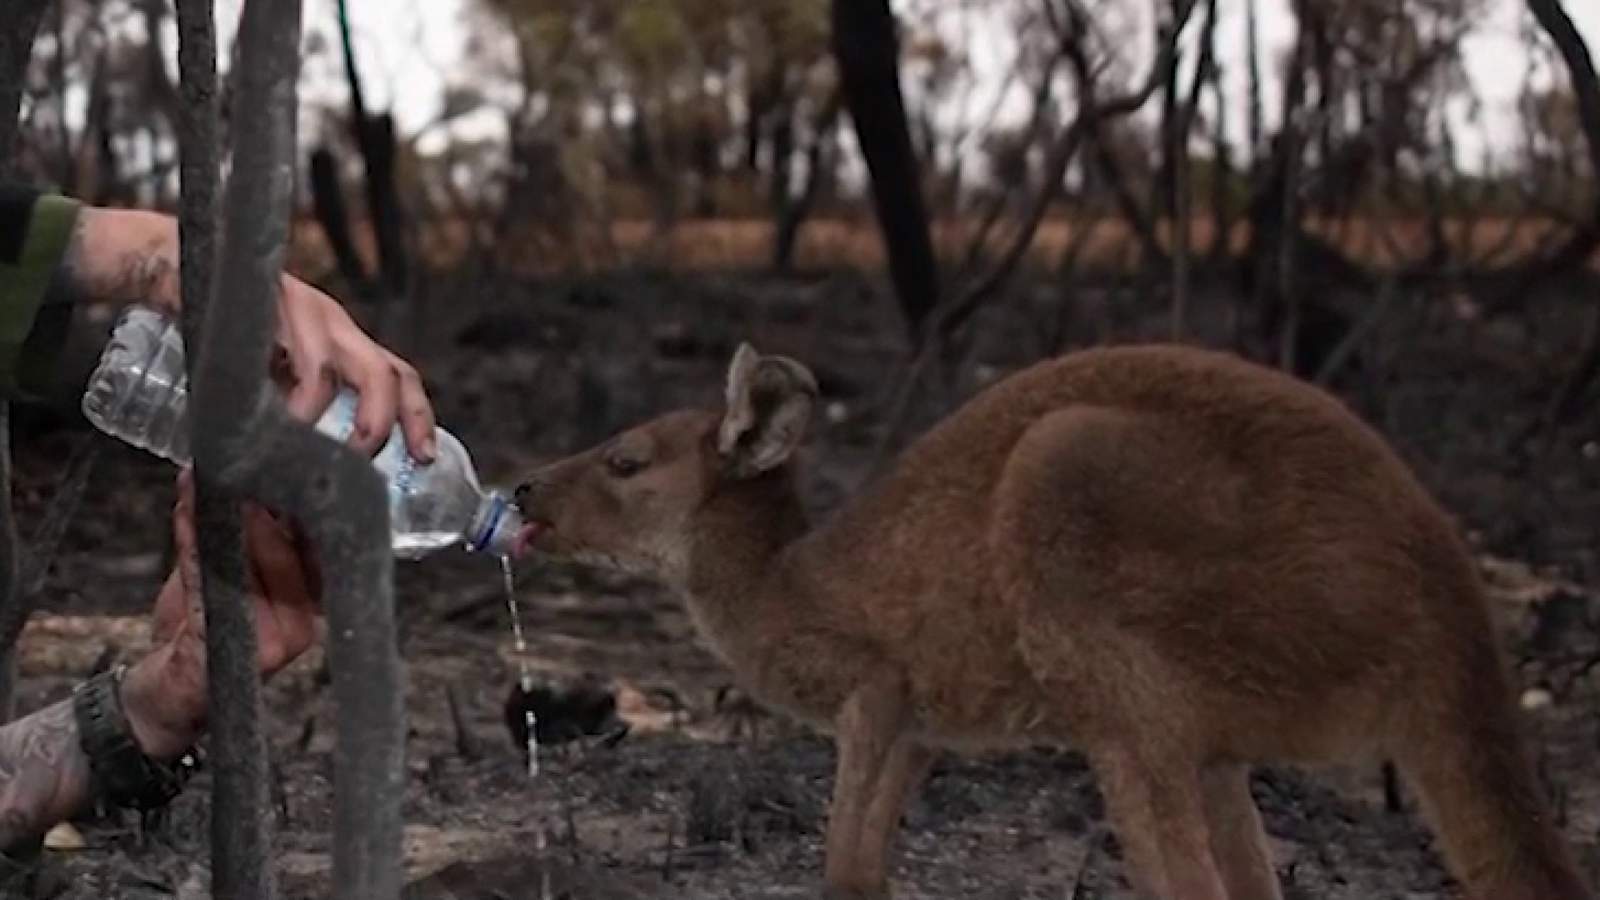 San Antonio Zoo sending veterinary staff to Australia to help animals affected by wildfires